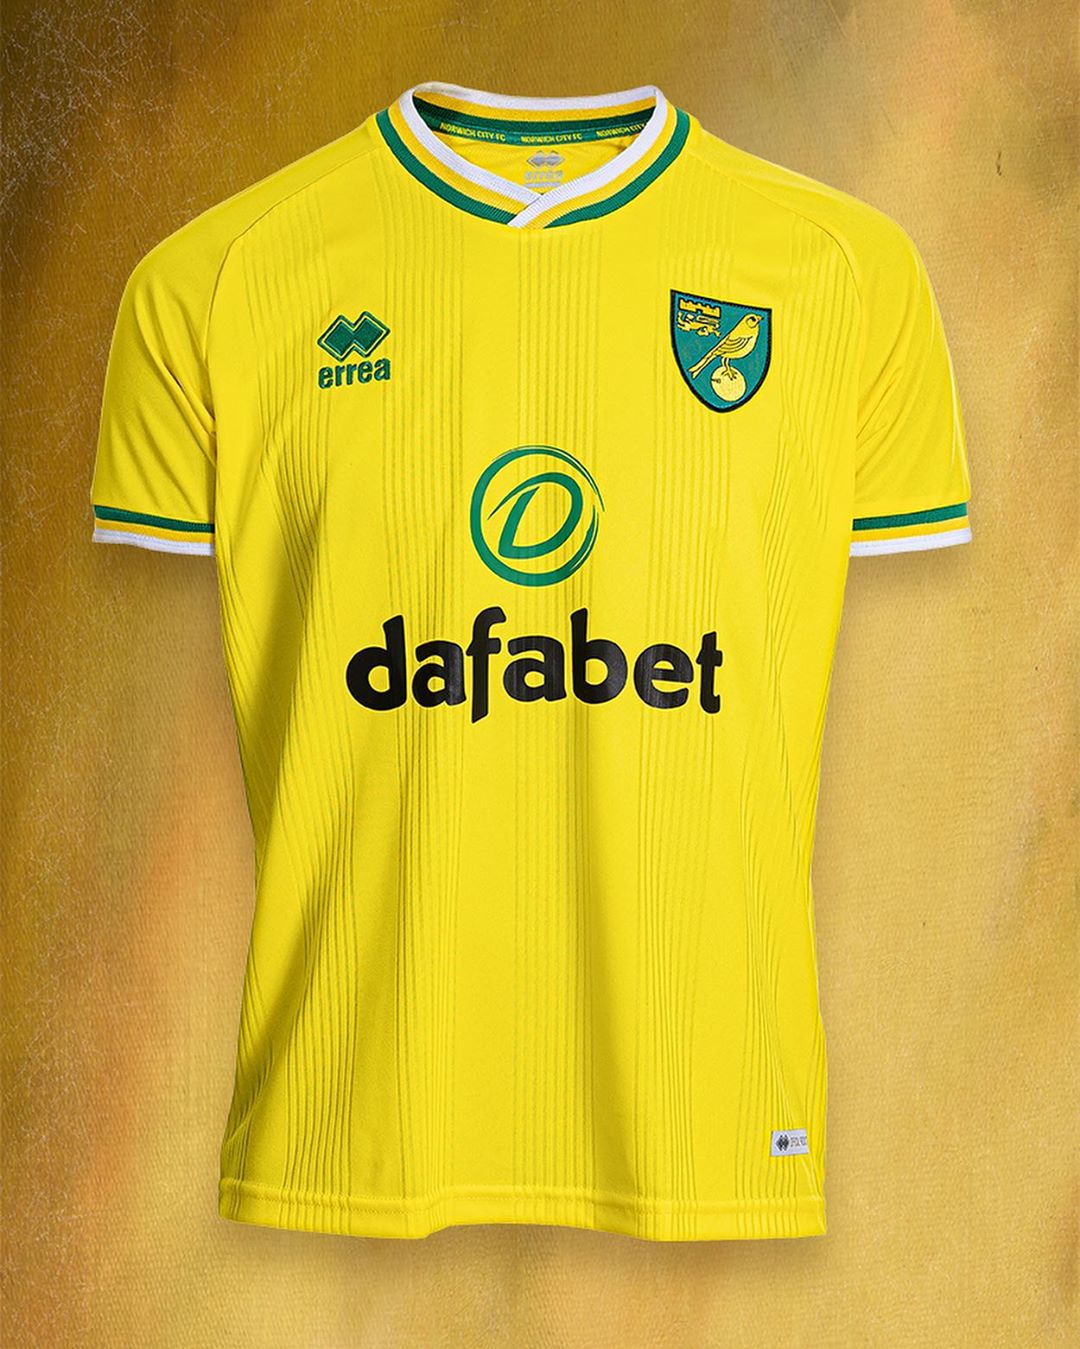 Norwich City voetbalshirts 2020-2021 - Voetbalshirts.com